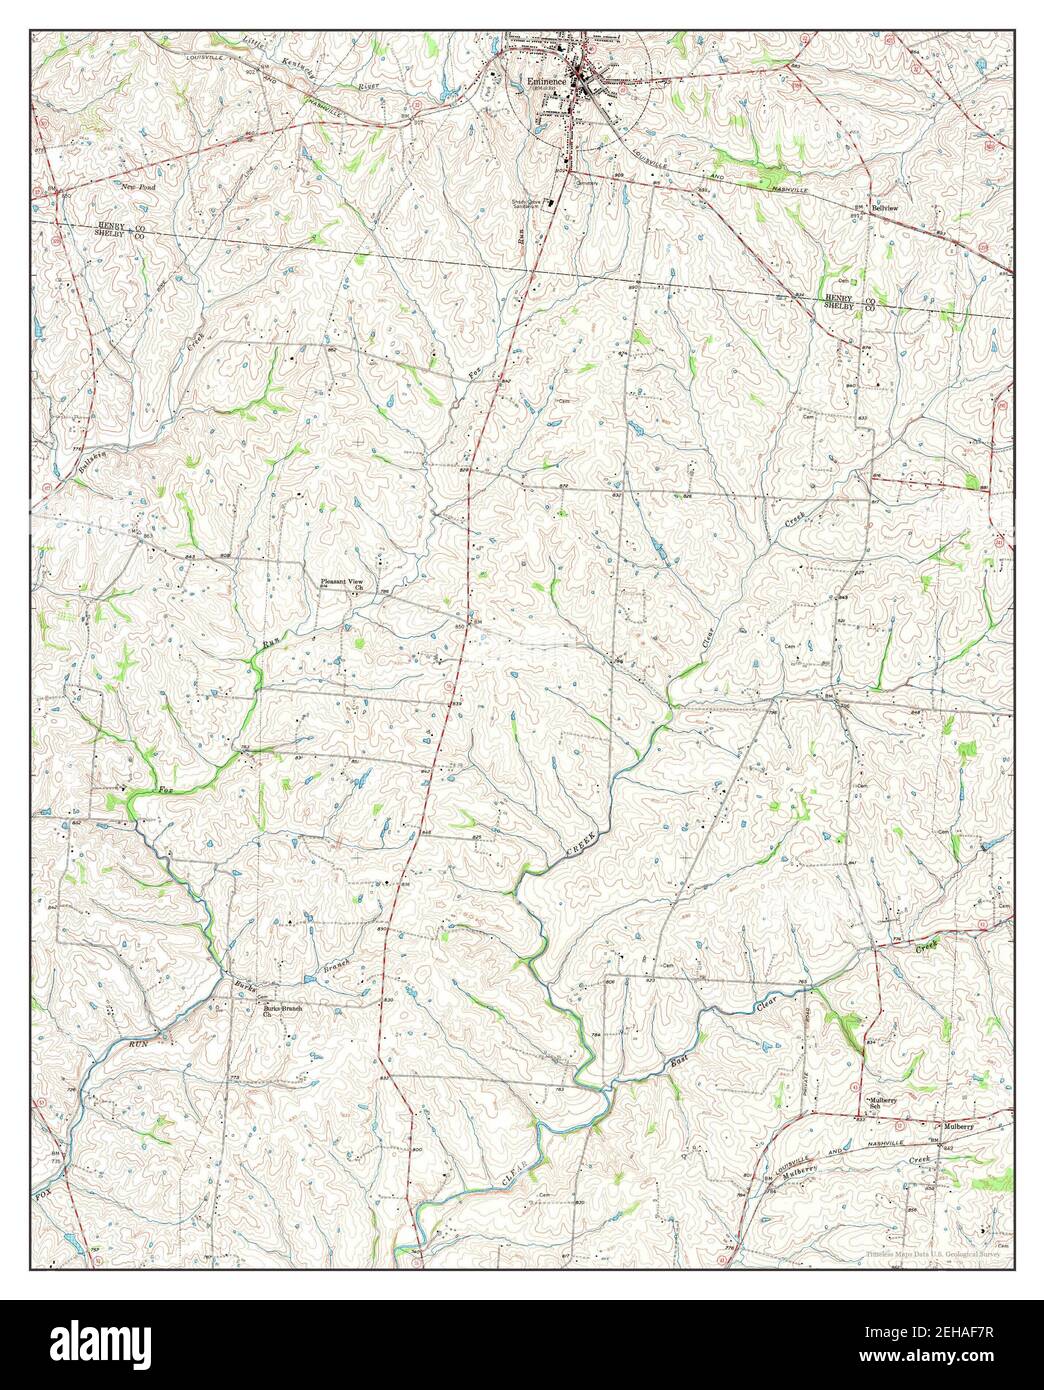 Eminence, Kentucky, map 1954, 1:24000, United States of America by Timeless Maps, data U.S. Geological Survey Stock Photo